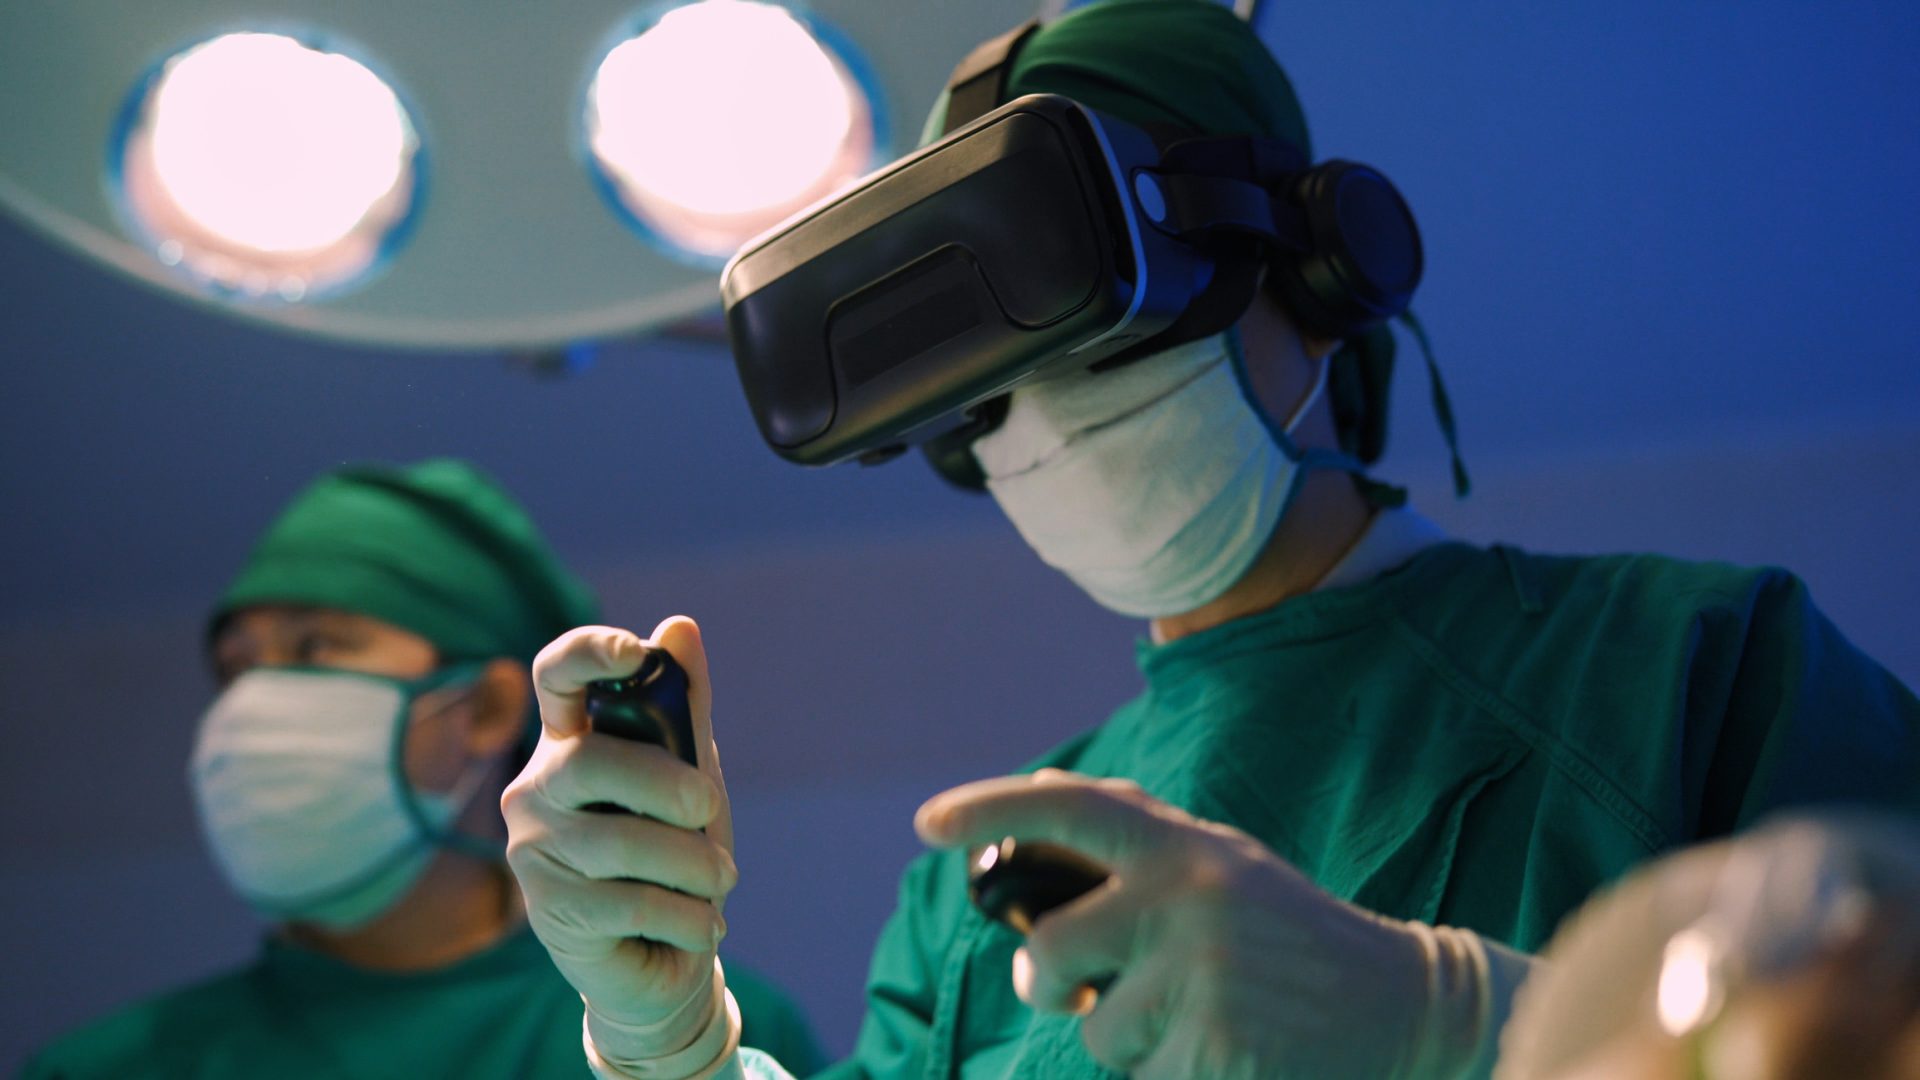 Smartness in healthcare: VR headset surgery